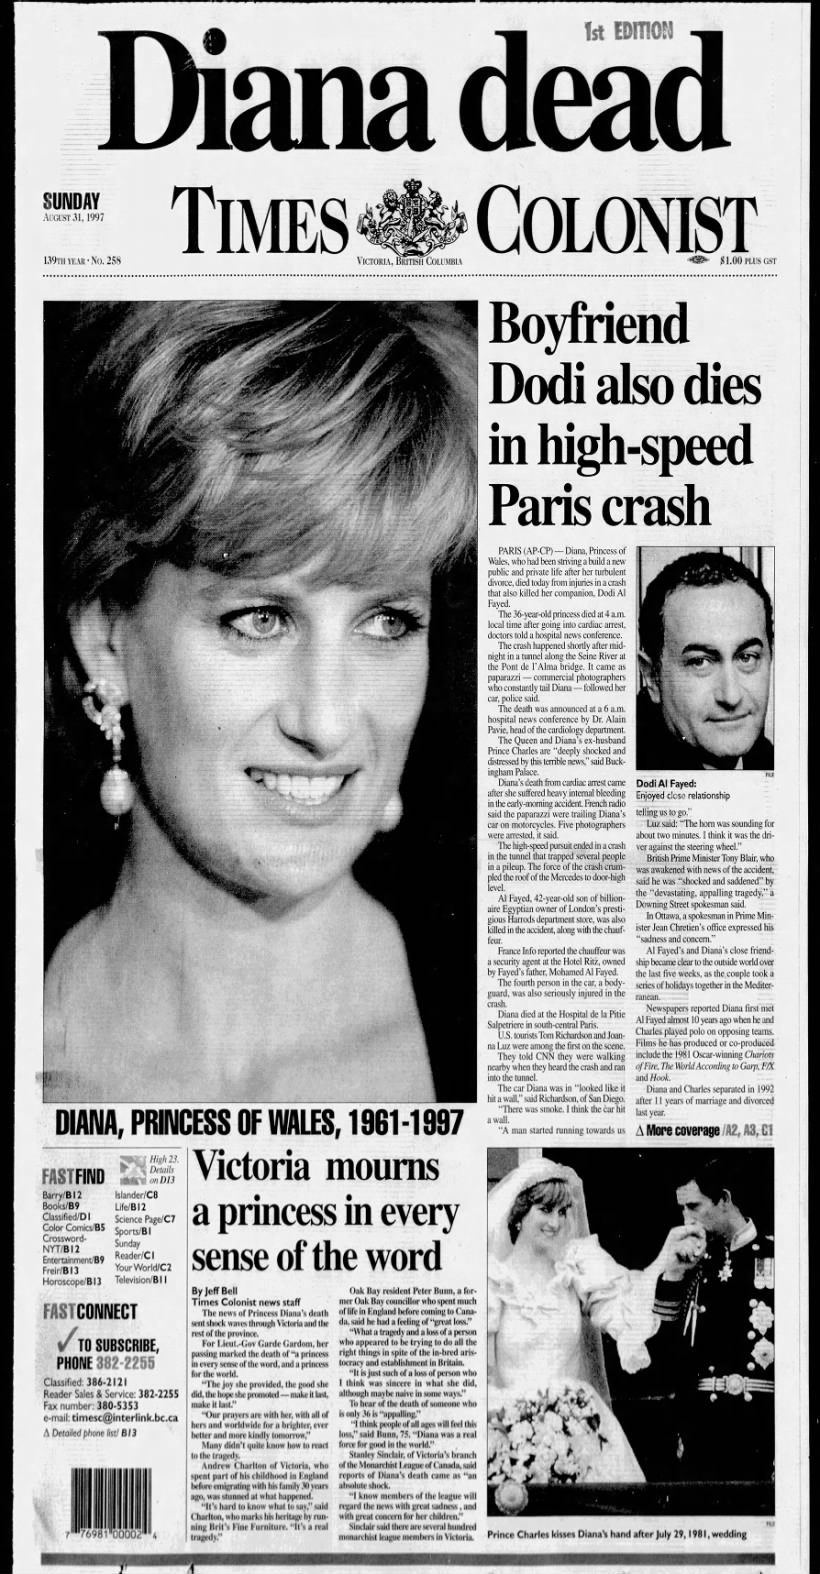 Times Colonist newspaper headlines from day of Princess Diana's death, August 31, 1997